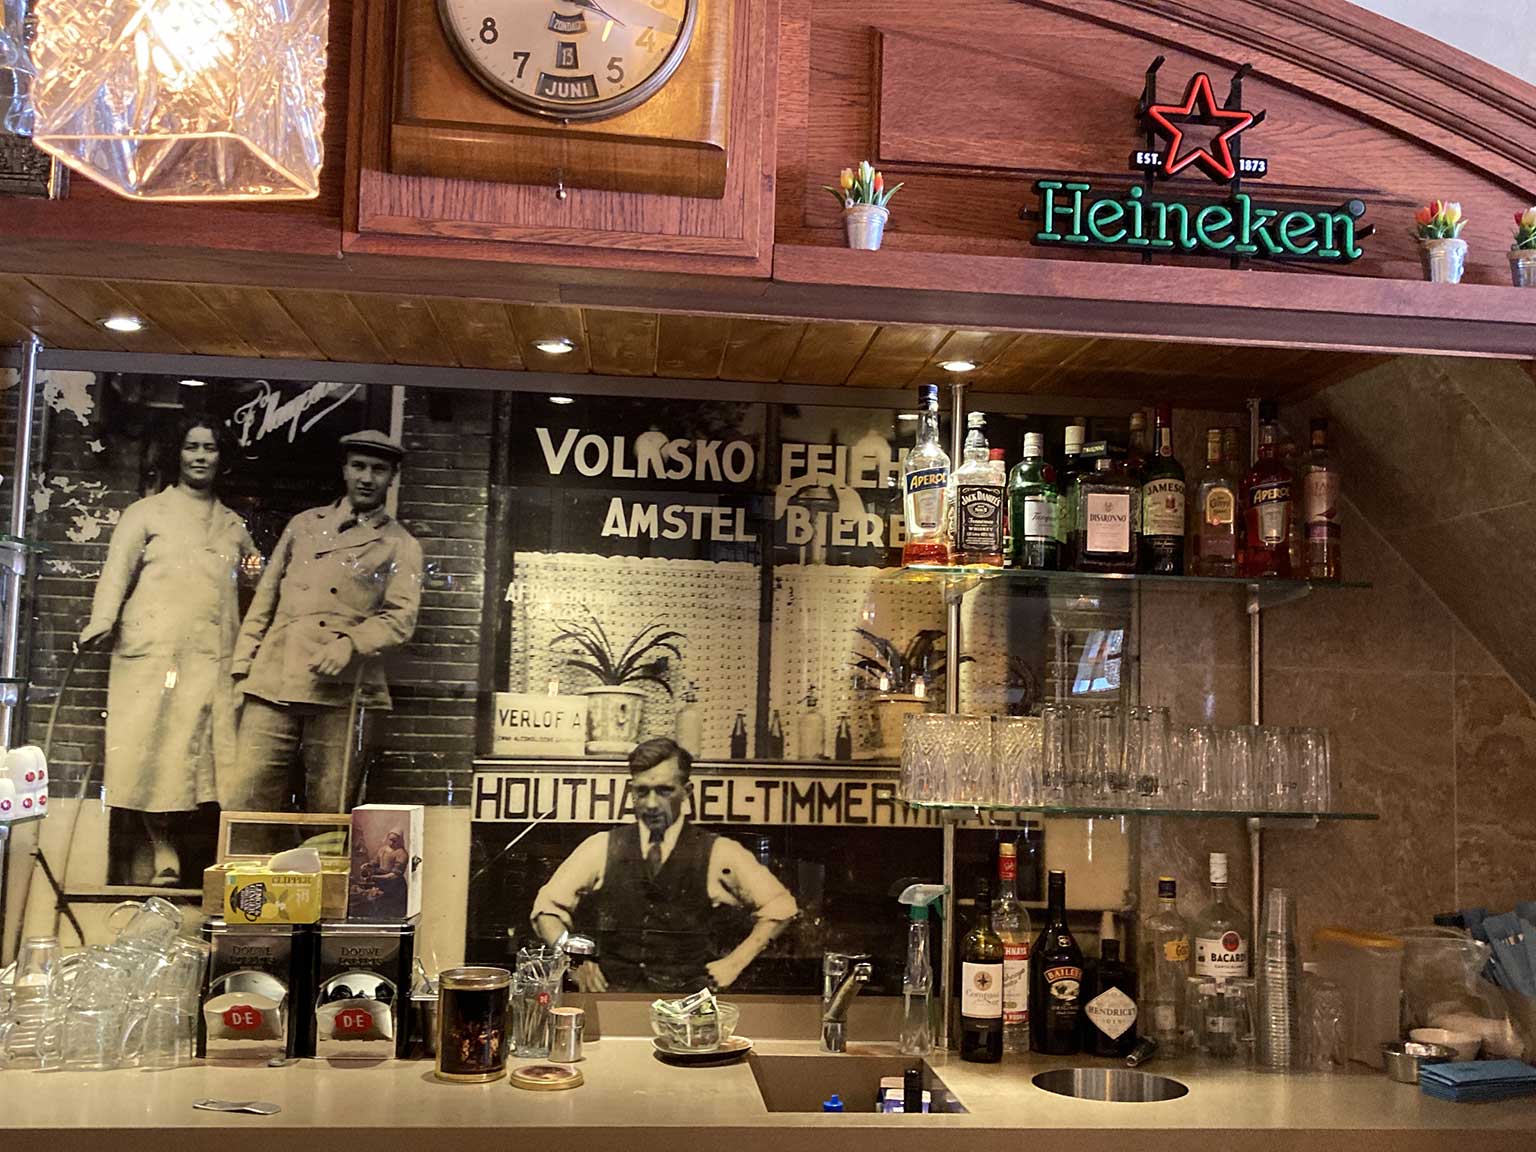 Lunchcafé De Spiegel, Amsterdam, with old photograph of when it was a Volkskoffiehuis